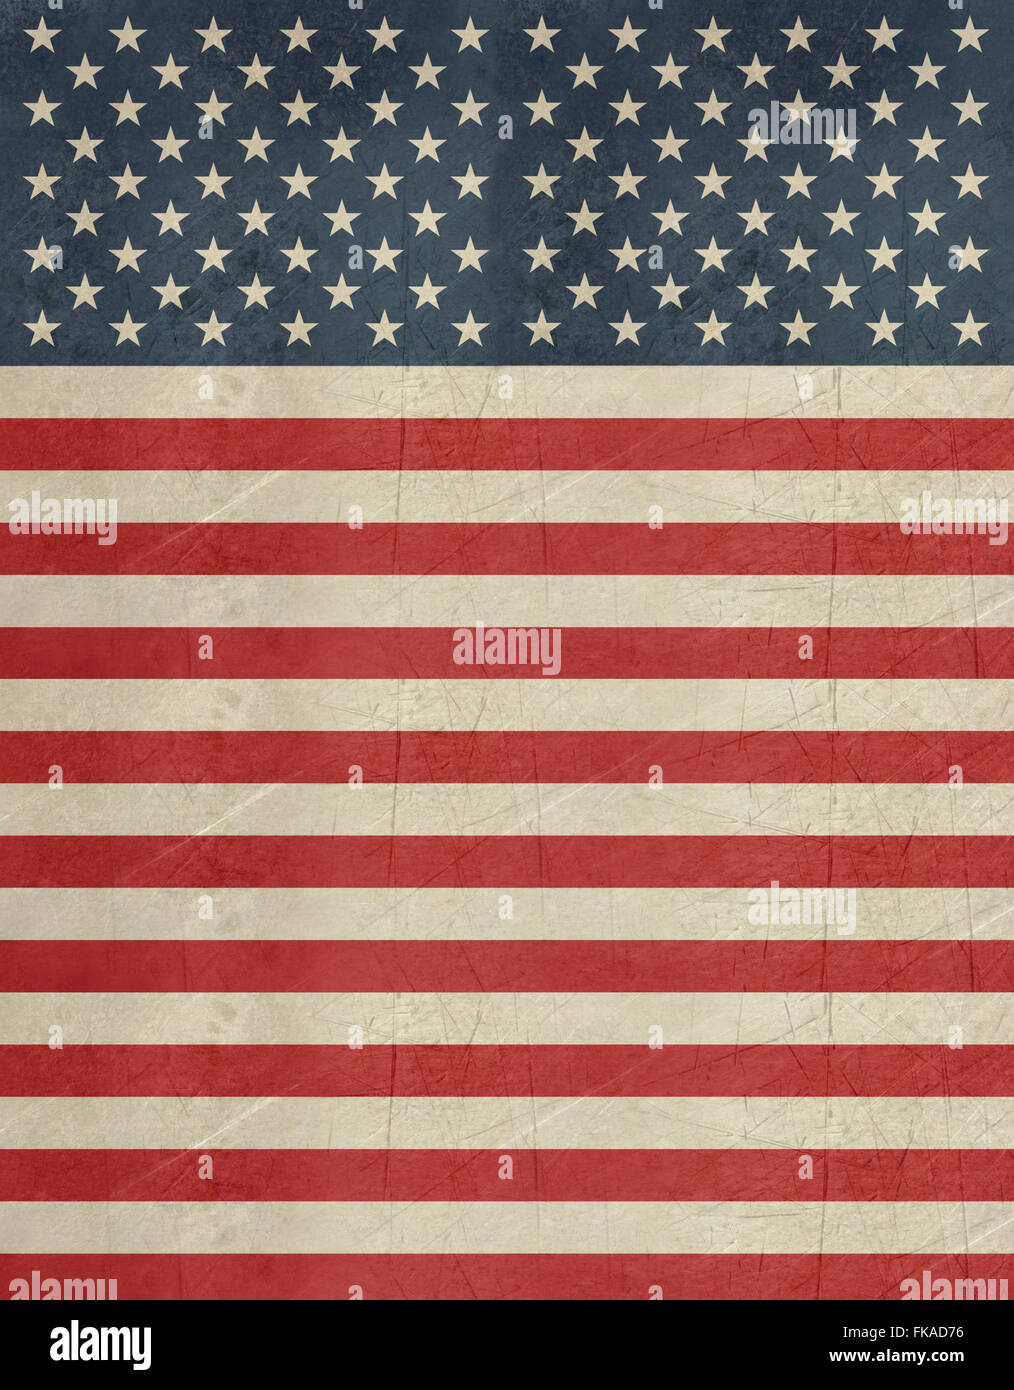 Grunge American flag banner hung vertically. Stock Photo